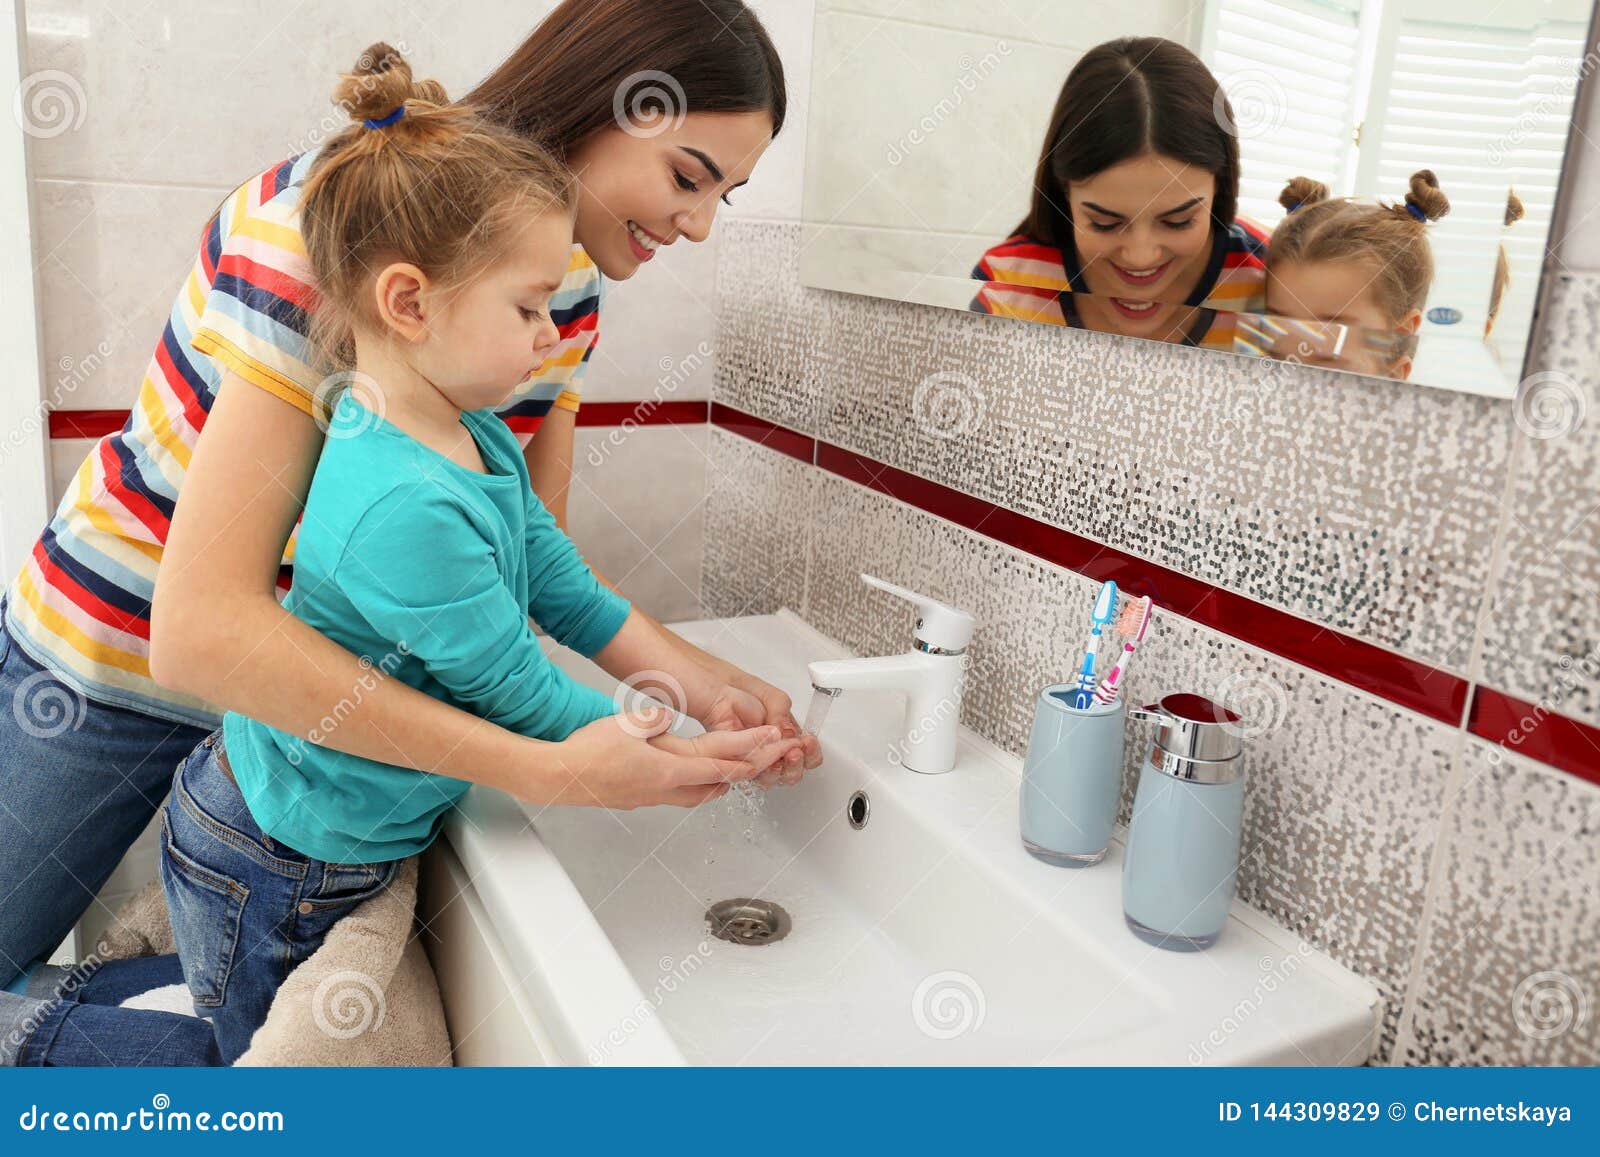 Happy Mother And Daughter Washing Hands In Bathroom Stock ...